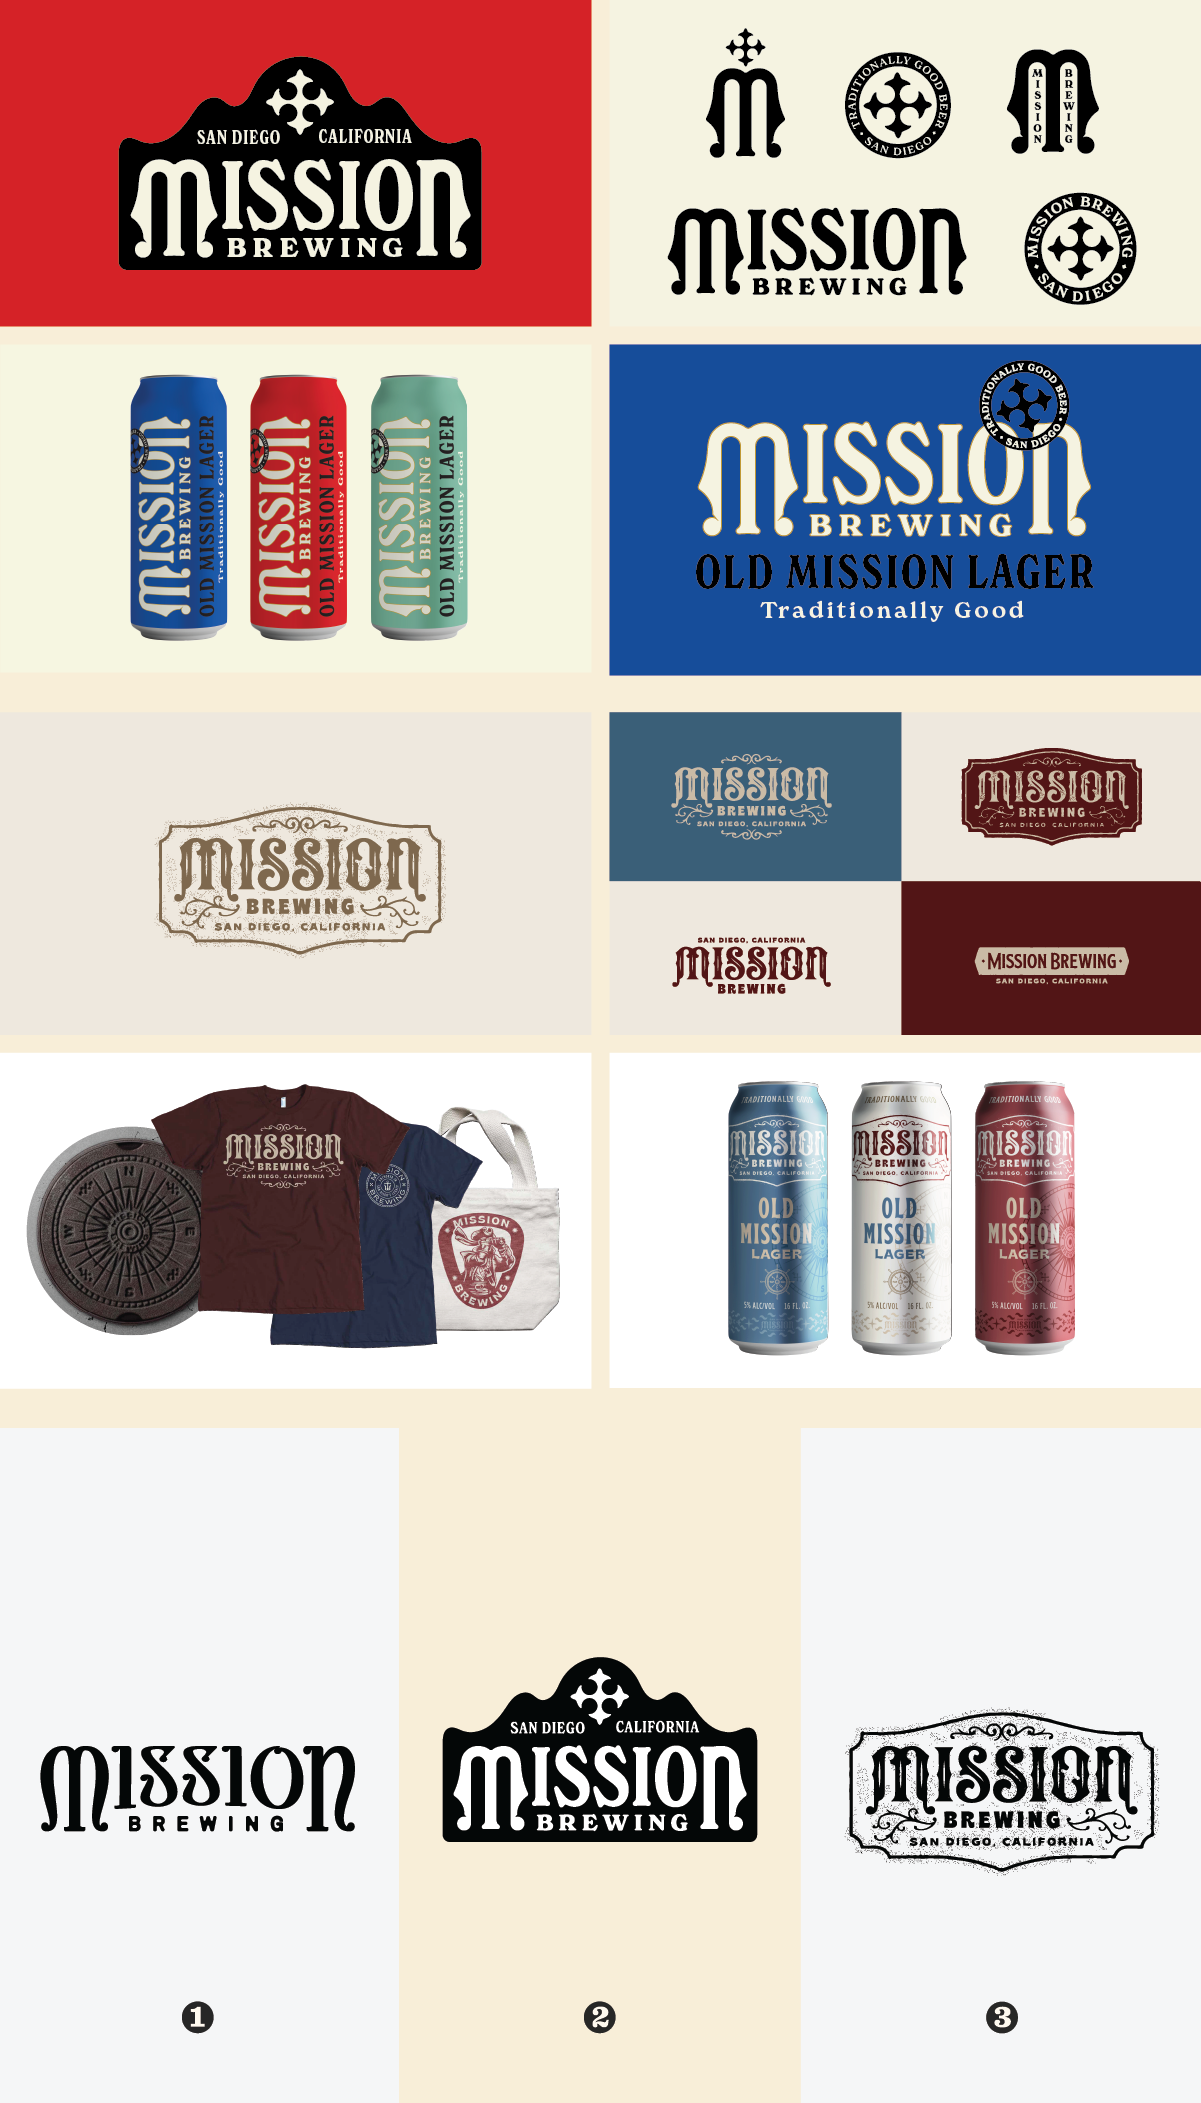 Mission brand identity images